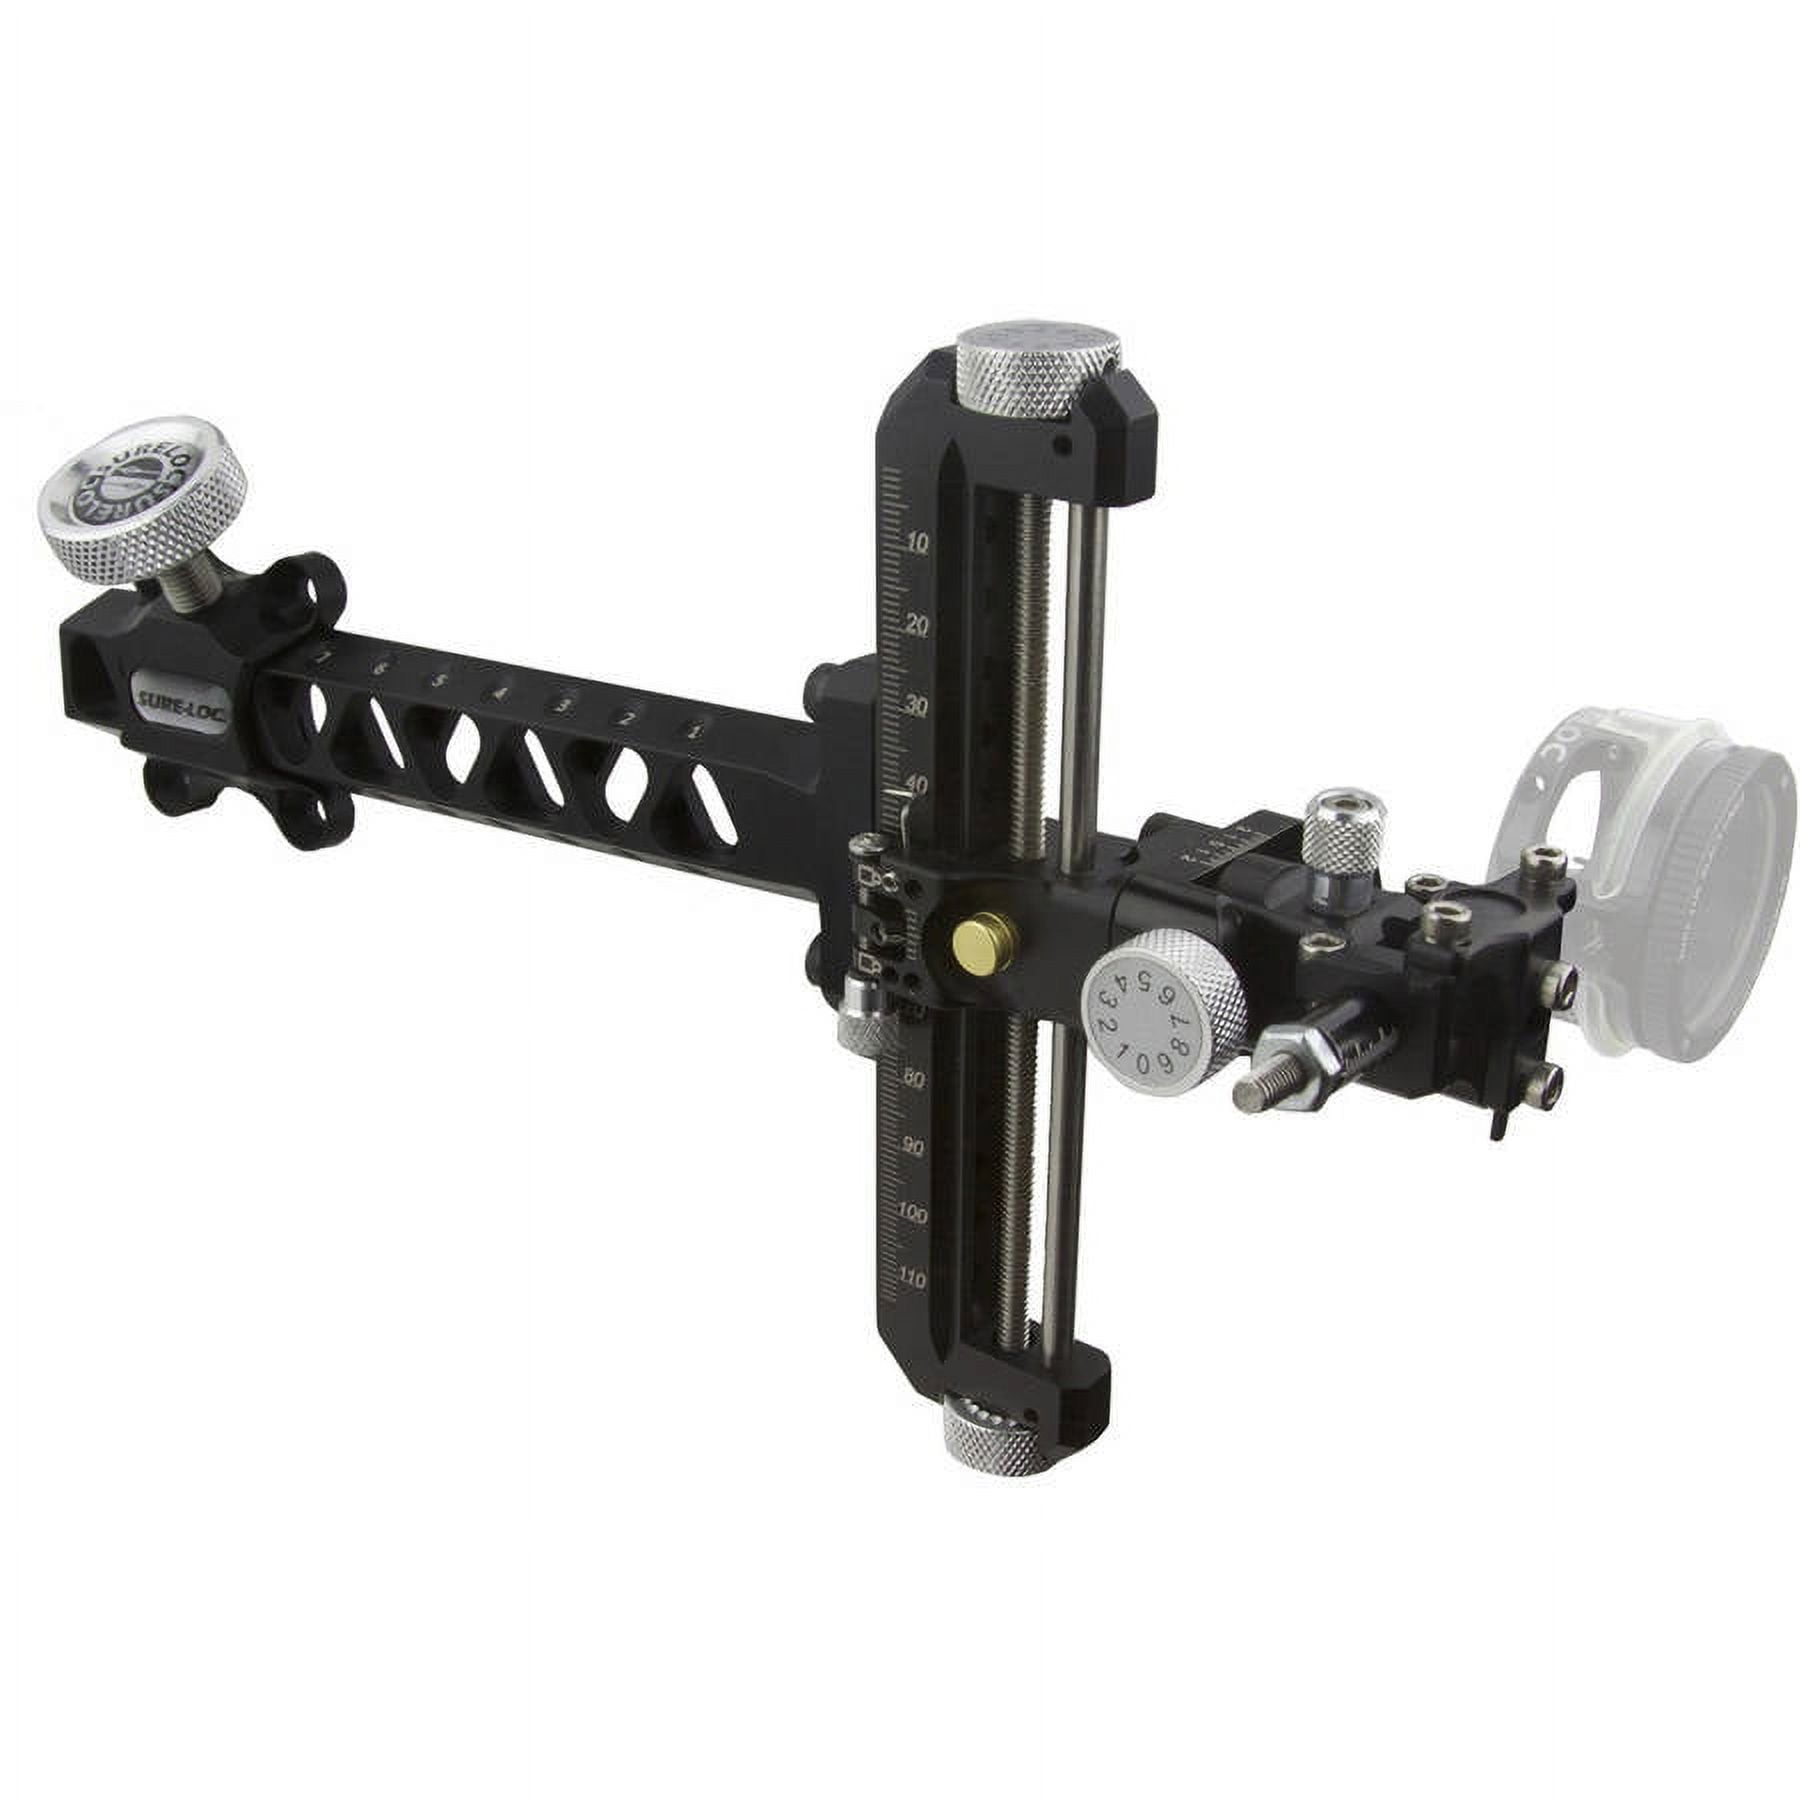 Sure Loc Challenger 550 Bow Sight 9 Extension Right Hand With 2 4x Scopes  for sale online